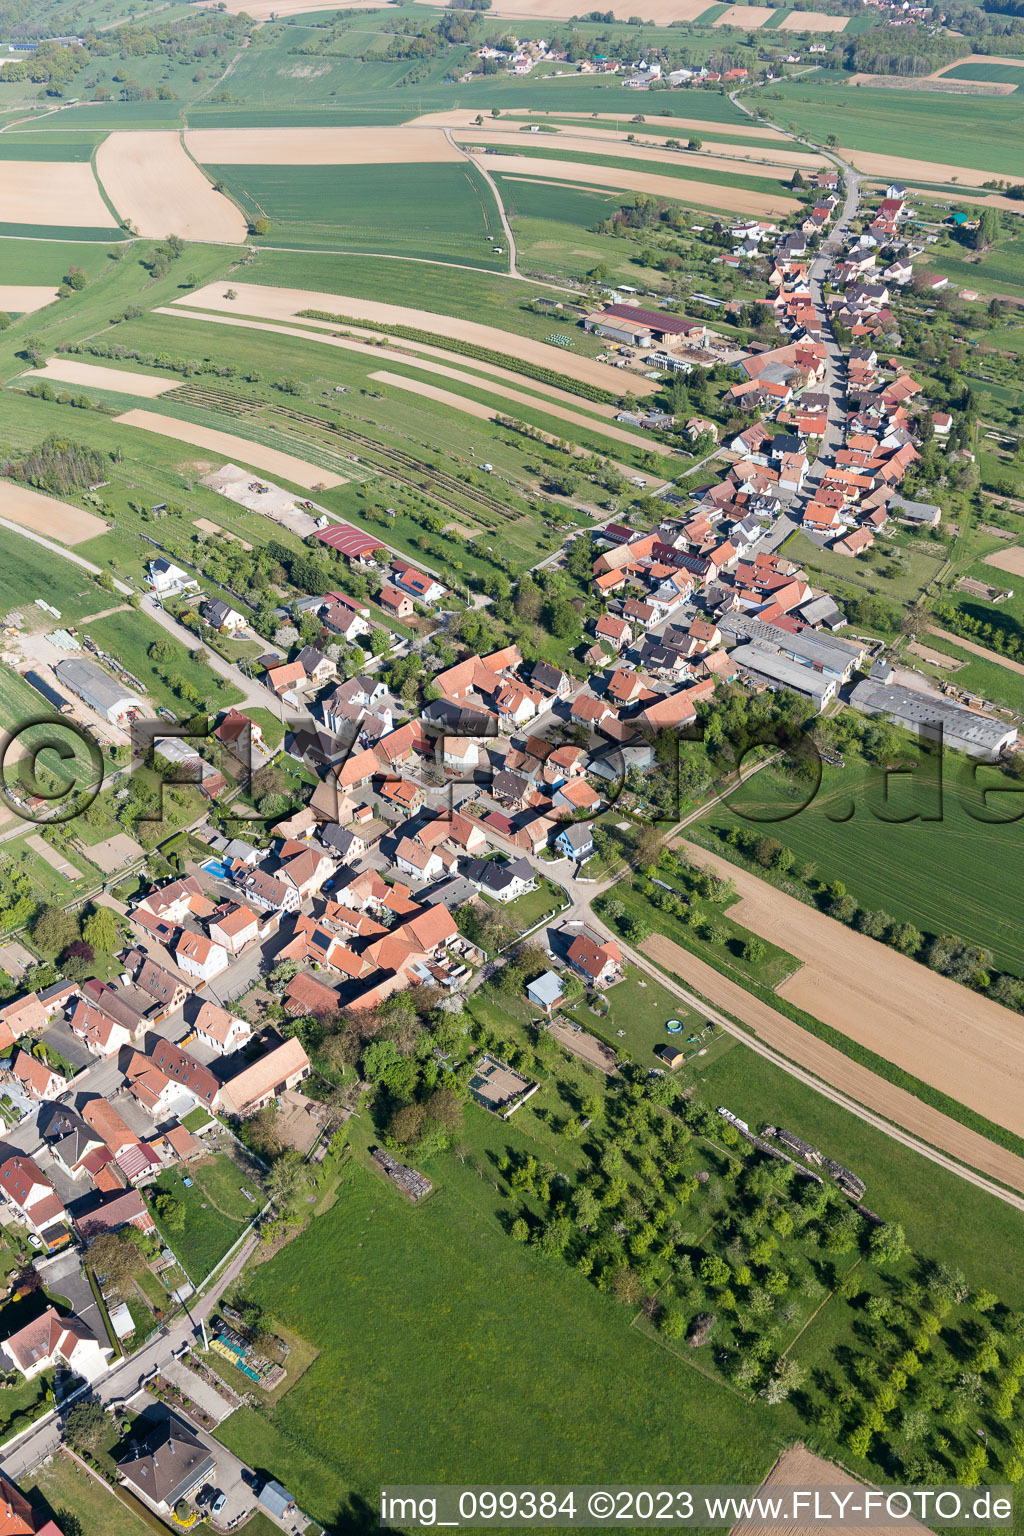 Forstheim in the state Bas-Rhin, France from above